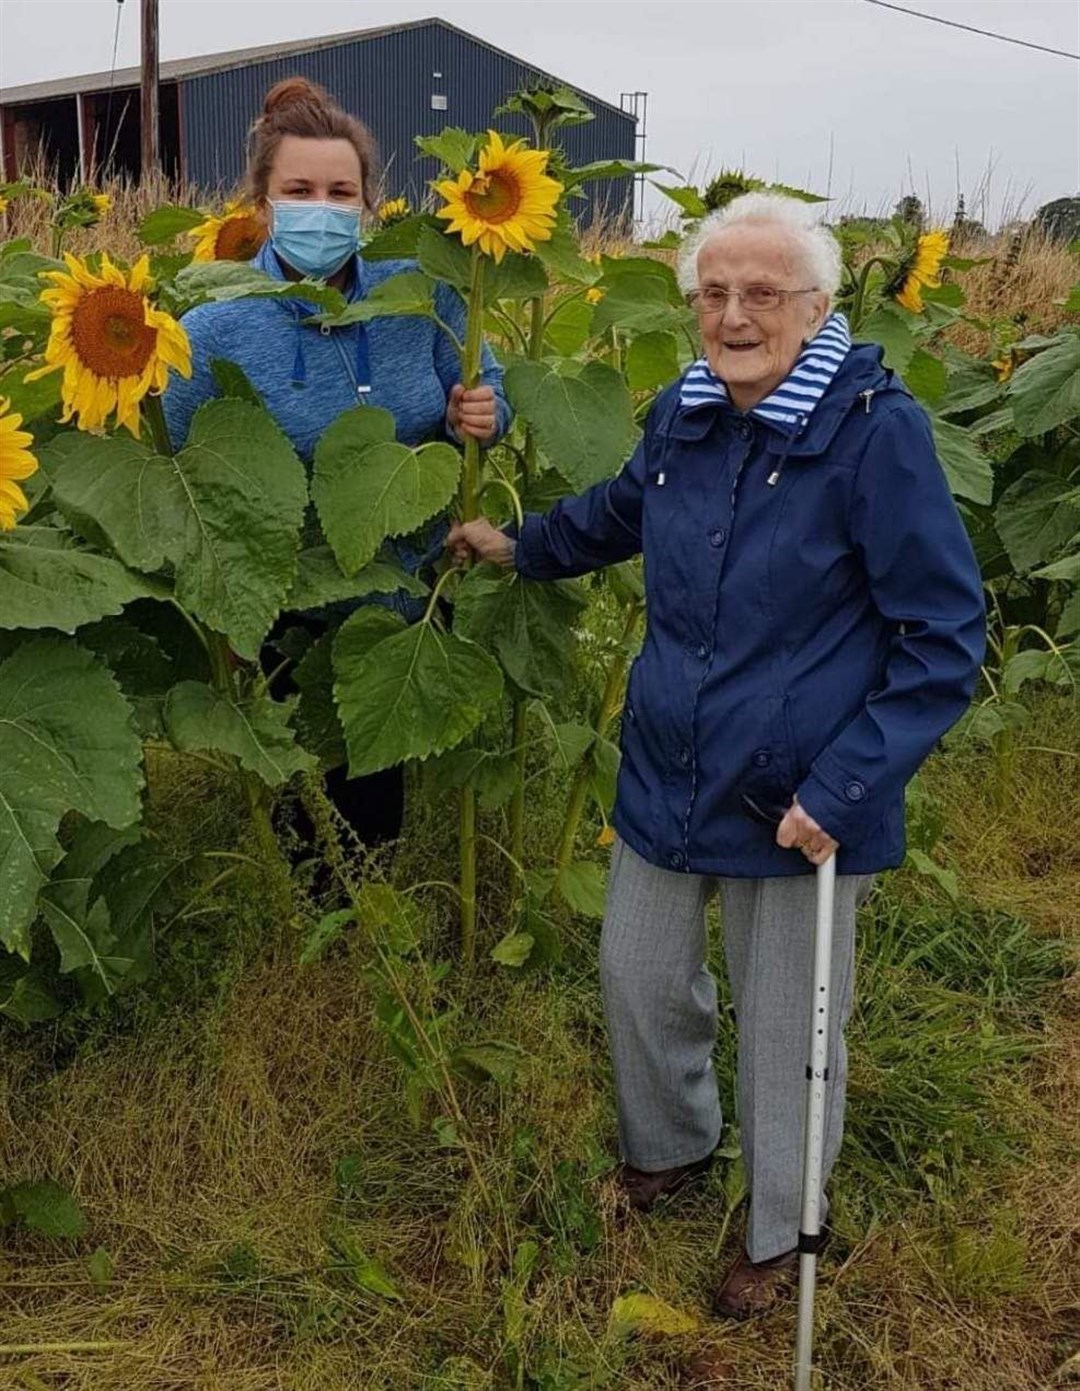 Lisa Toogood and Margaret Fettes with some of the lovely sunflowers.